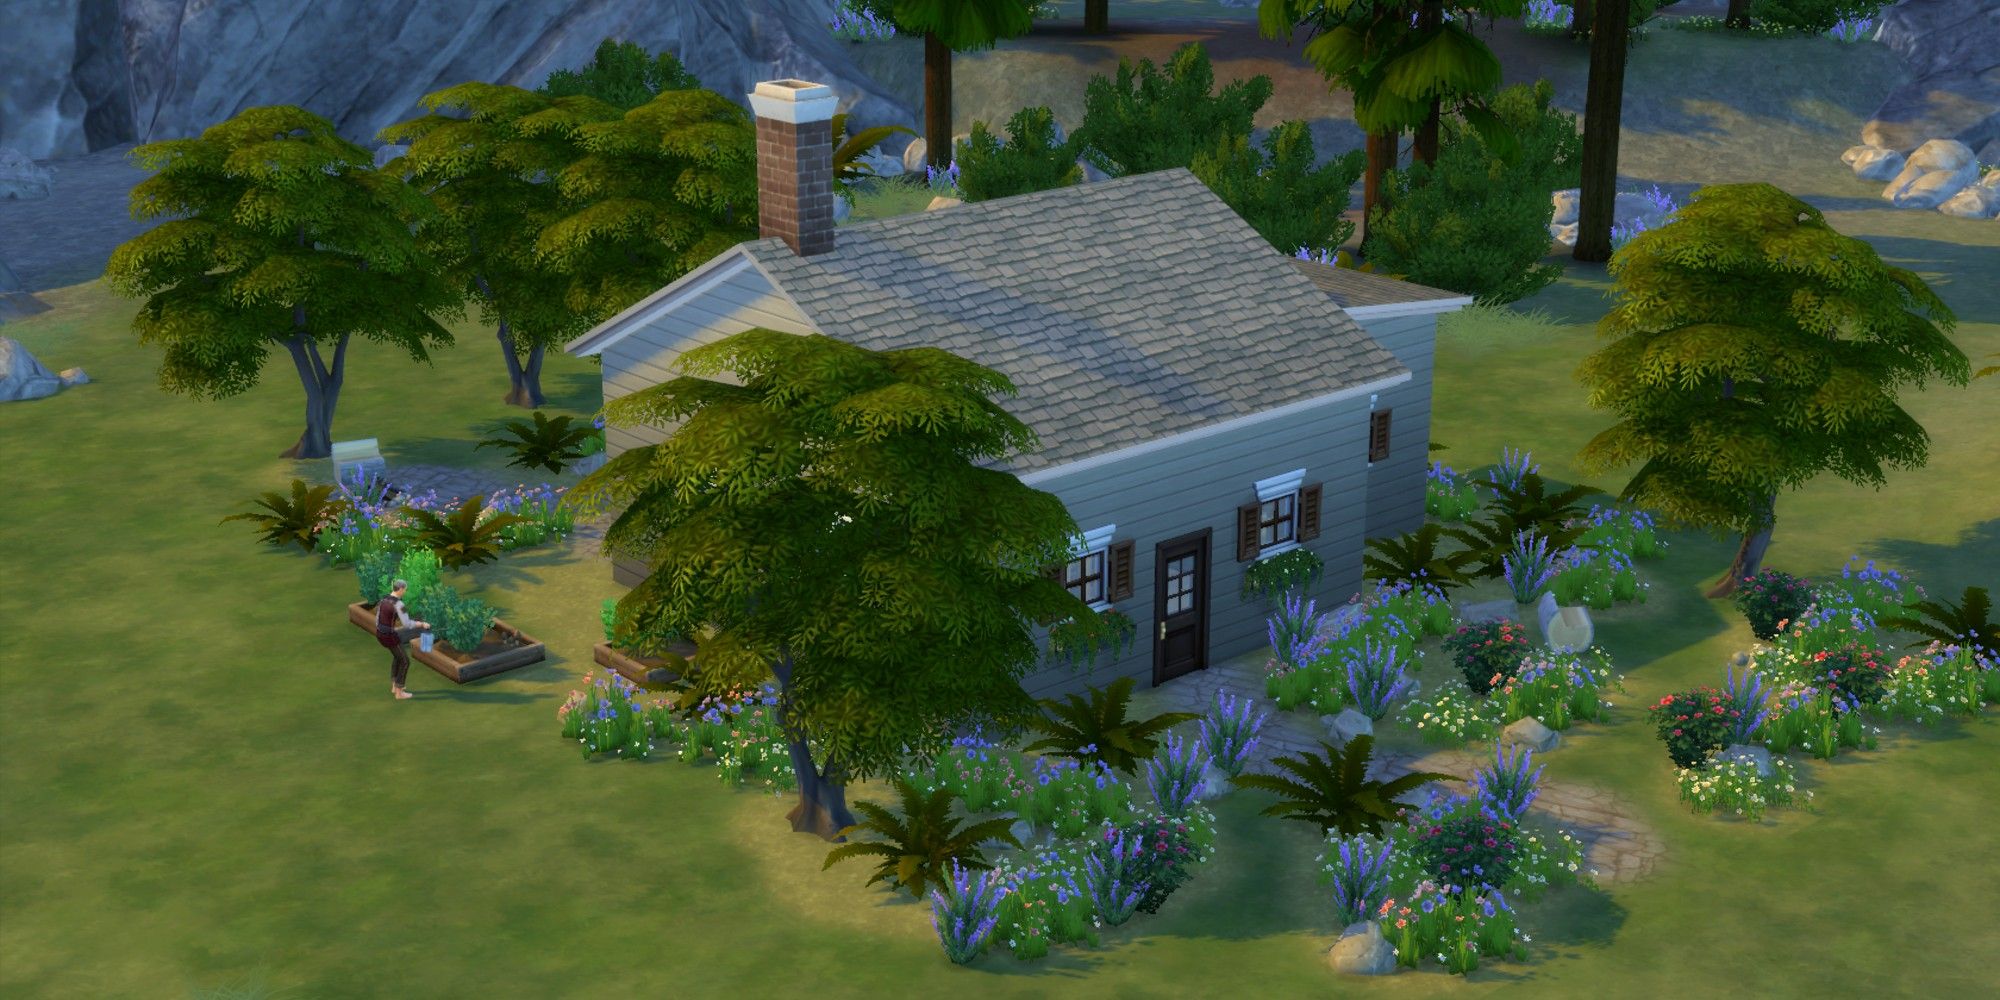 The Hermit House or The Deep Woods in Granite Falls in The Sims 4 Outdoor Retreat